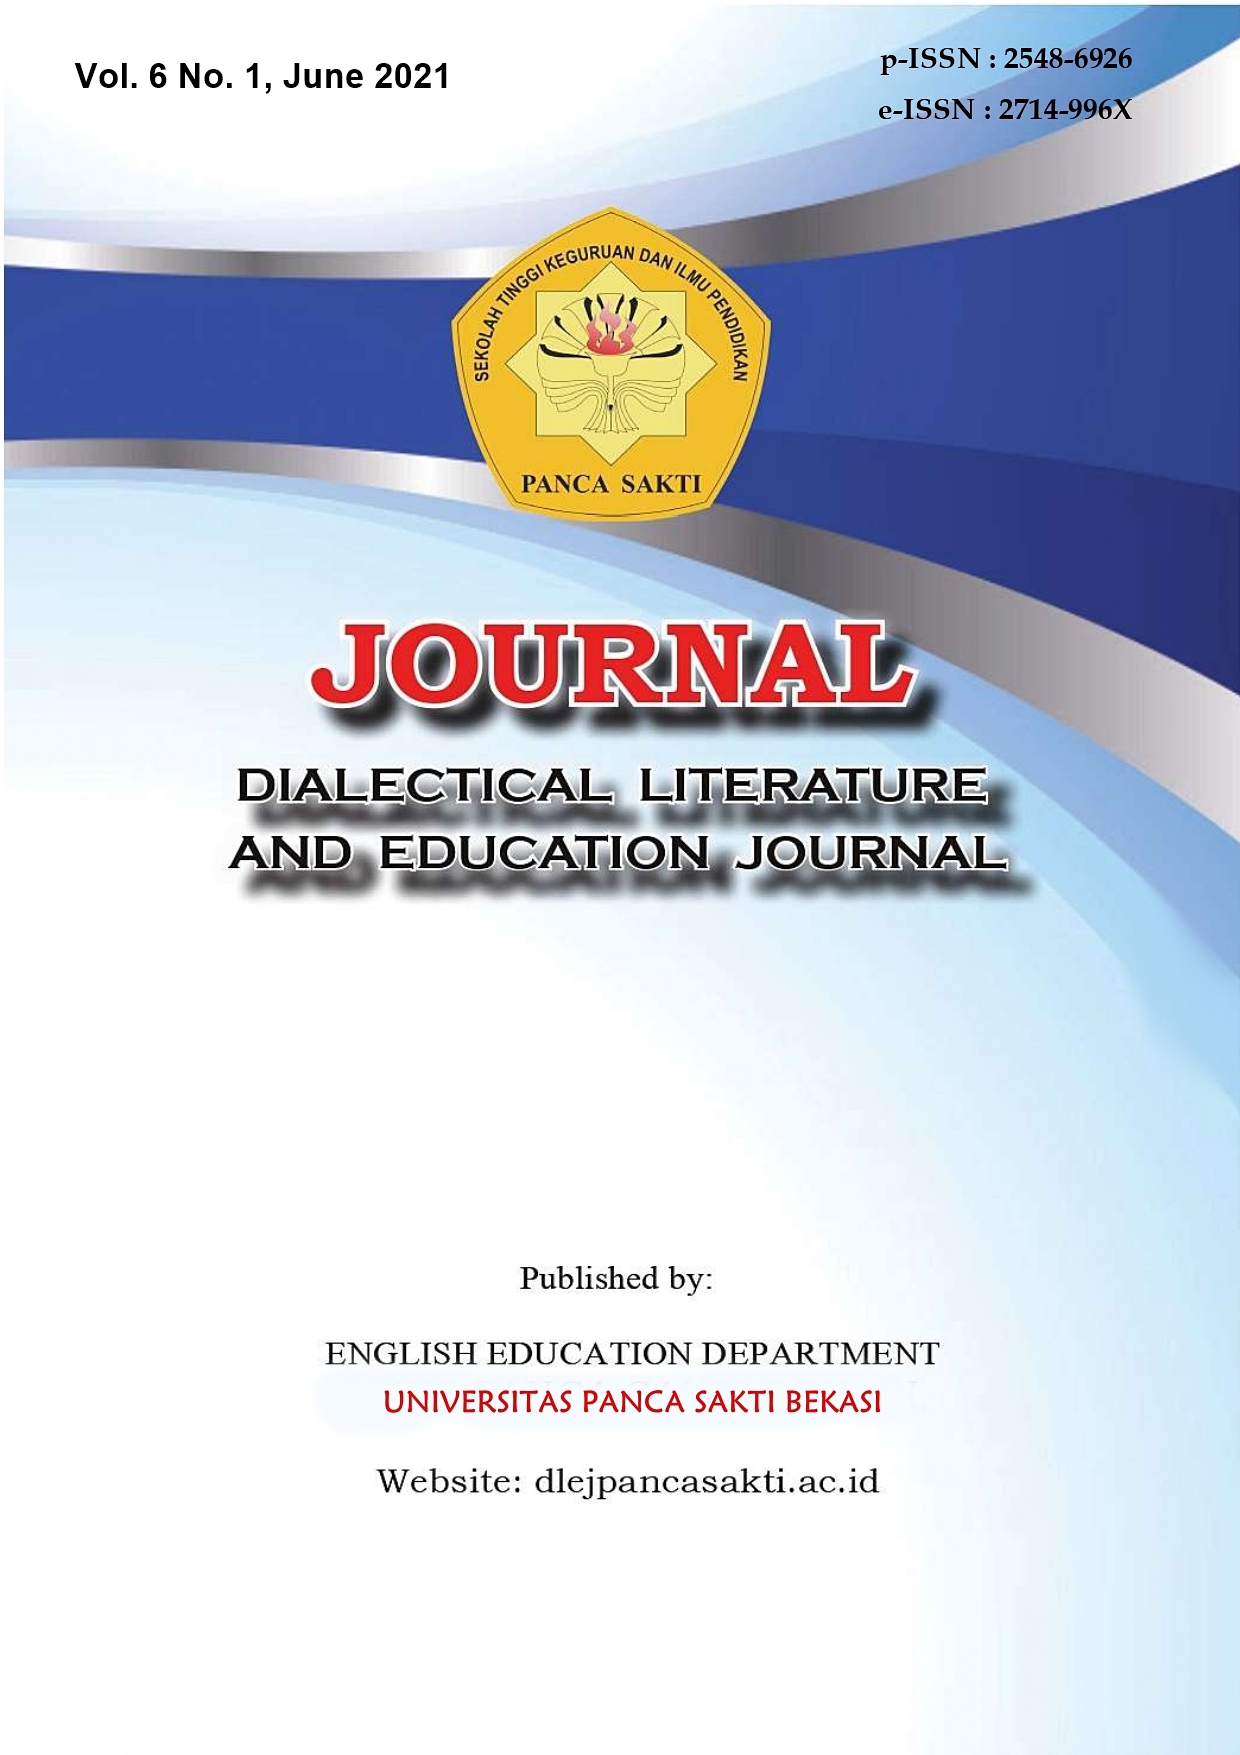 					View Vol. 6 No. 1 (2021): Dialectical Literature and Education Journal
				